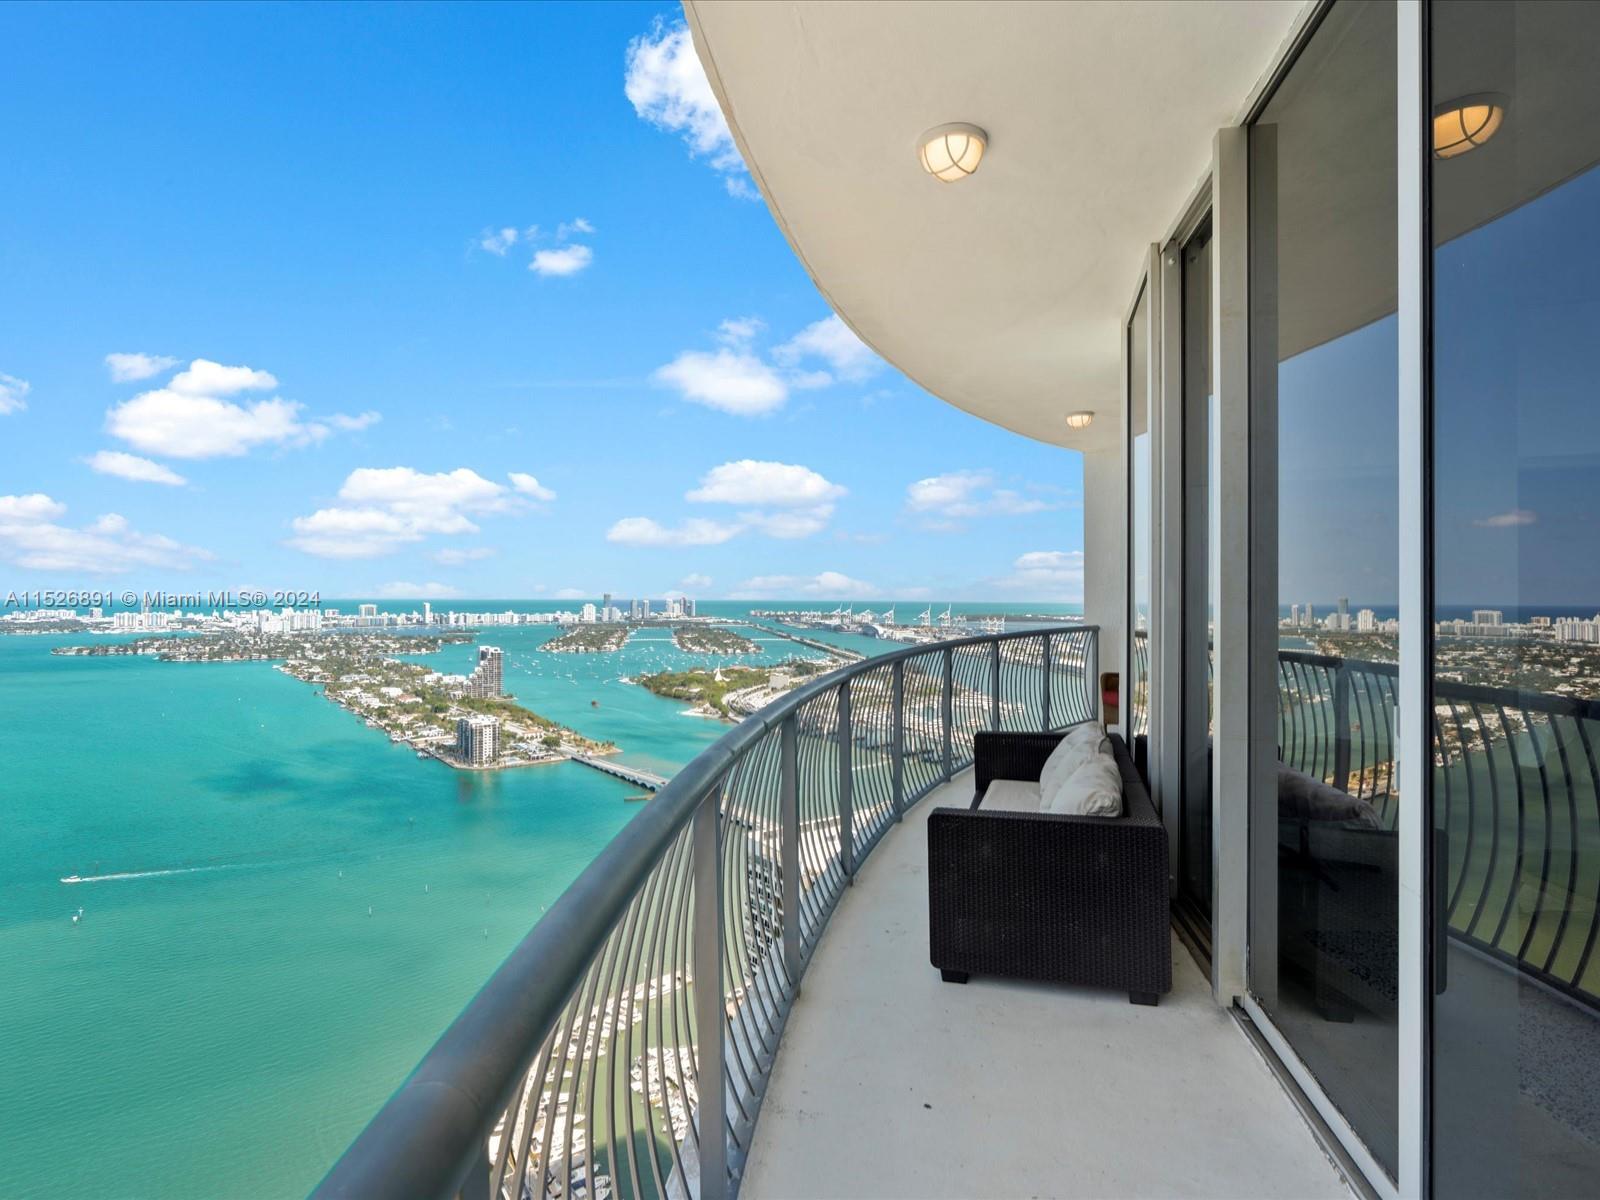 Top floor Penthouse unit on 56th level in the '01 line. Endless Eastern facing views of Biscayne Bay &,, Miami Beach. Furnished or unfurnished 2 bd/ 2 ba, 12-foot high ceilings, washer/dryer in unit, & premium parking space on 2nd level. The Opera Tower has a new state-of-the-art fitness center & pool, facial recognition entry, 24 hr Mini Market, wine market, barber shop, restaurant and bar on-site, 24/7 Valet, & Security. Outside your front door is Pura Vida, Cassadonna, and Margaret Pace Park w/ Tennis, Volleyball, Basketball, Jogging Path, Dog Park, BBQ, etc. In popular Edgewater area, minutes from Downtown, Arts & Entertainment District, Wynwood, Midtown & Design District, 10 min to South Beach & steps to pedestrian-friendly Venetian Causeway. Not Short Term.